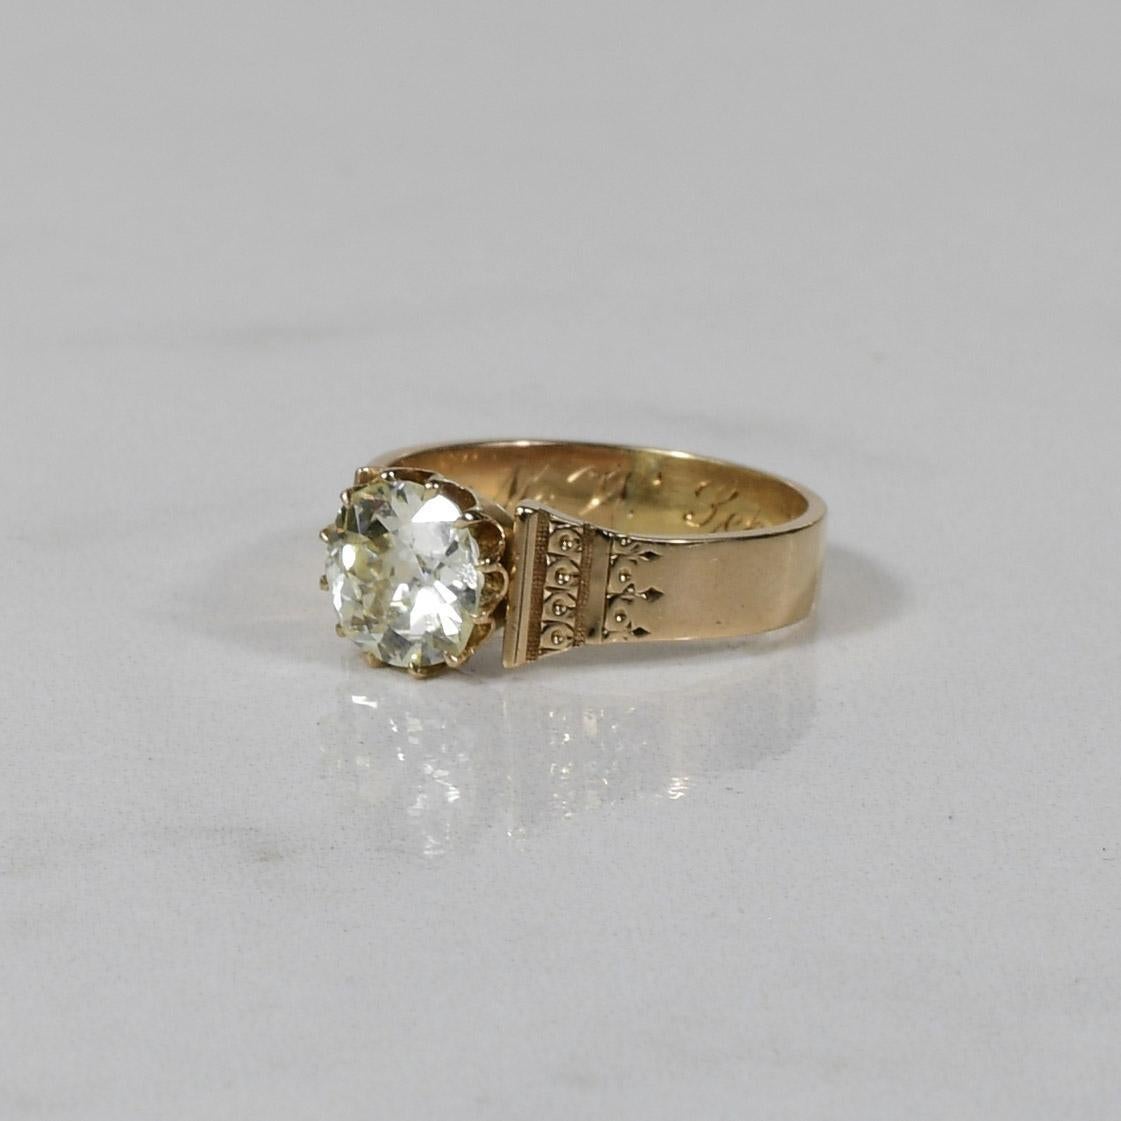 Cushion Cut Victorian 1.71ct Diamond Engagement Ring Dated 1896 For Sale